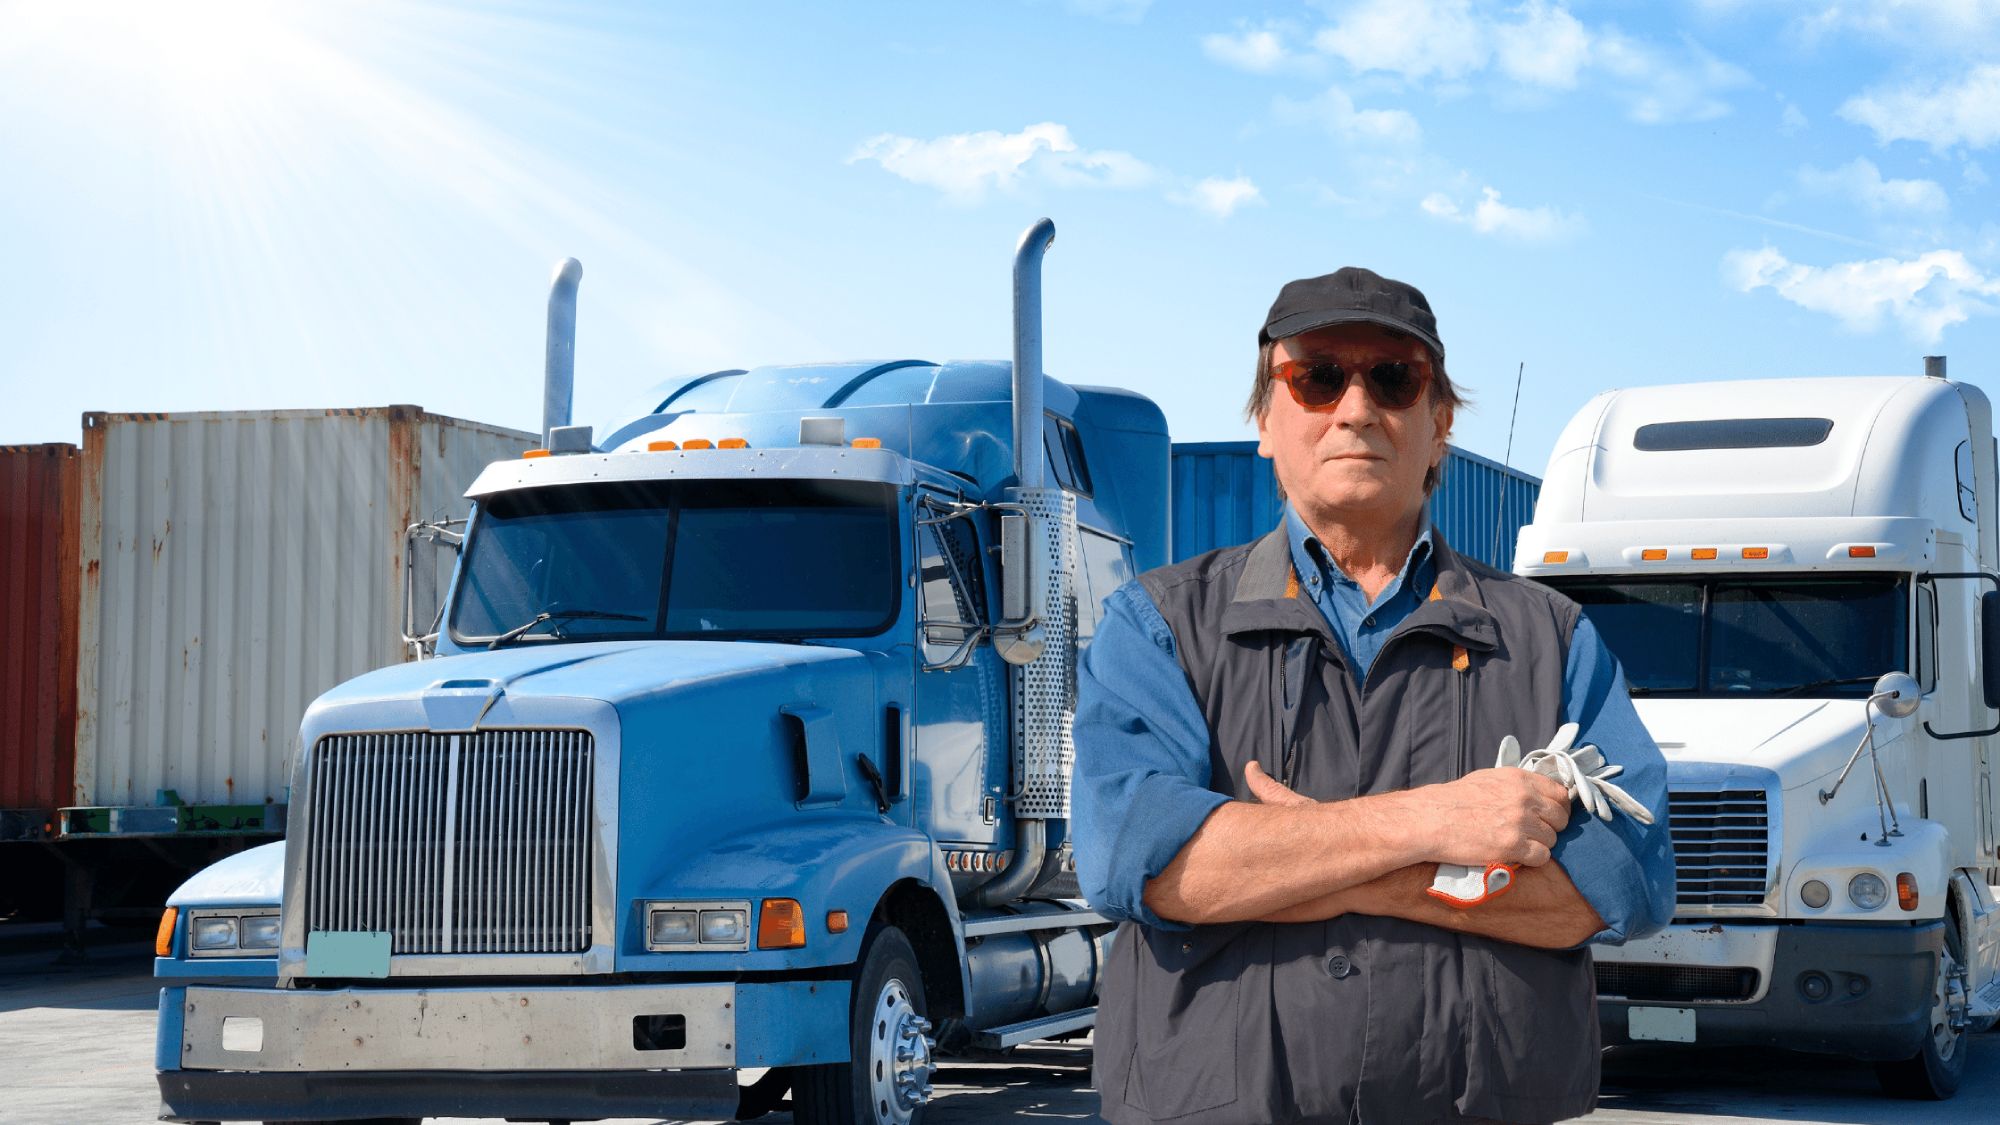 Get a Freight Broker License: The Easiest Way To Get It